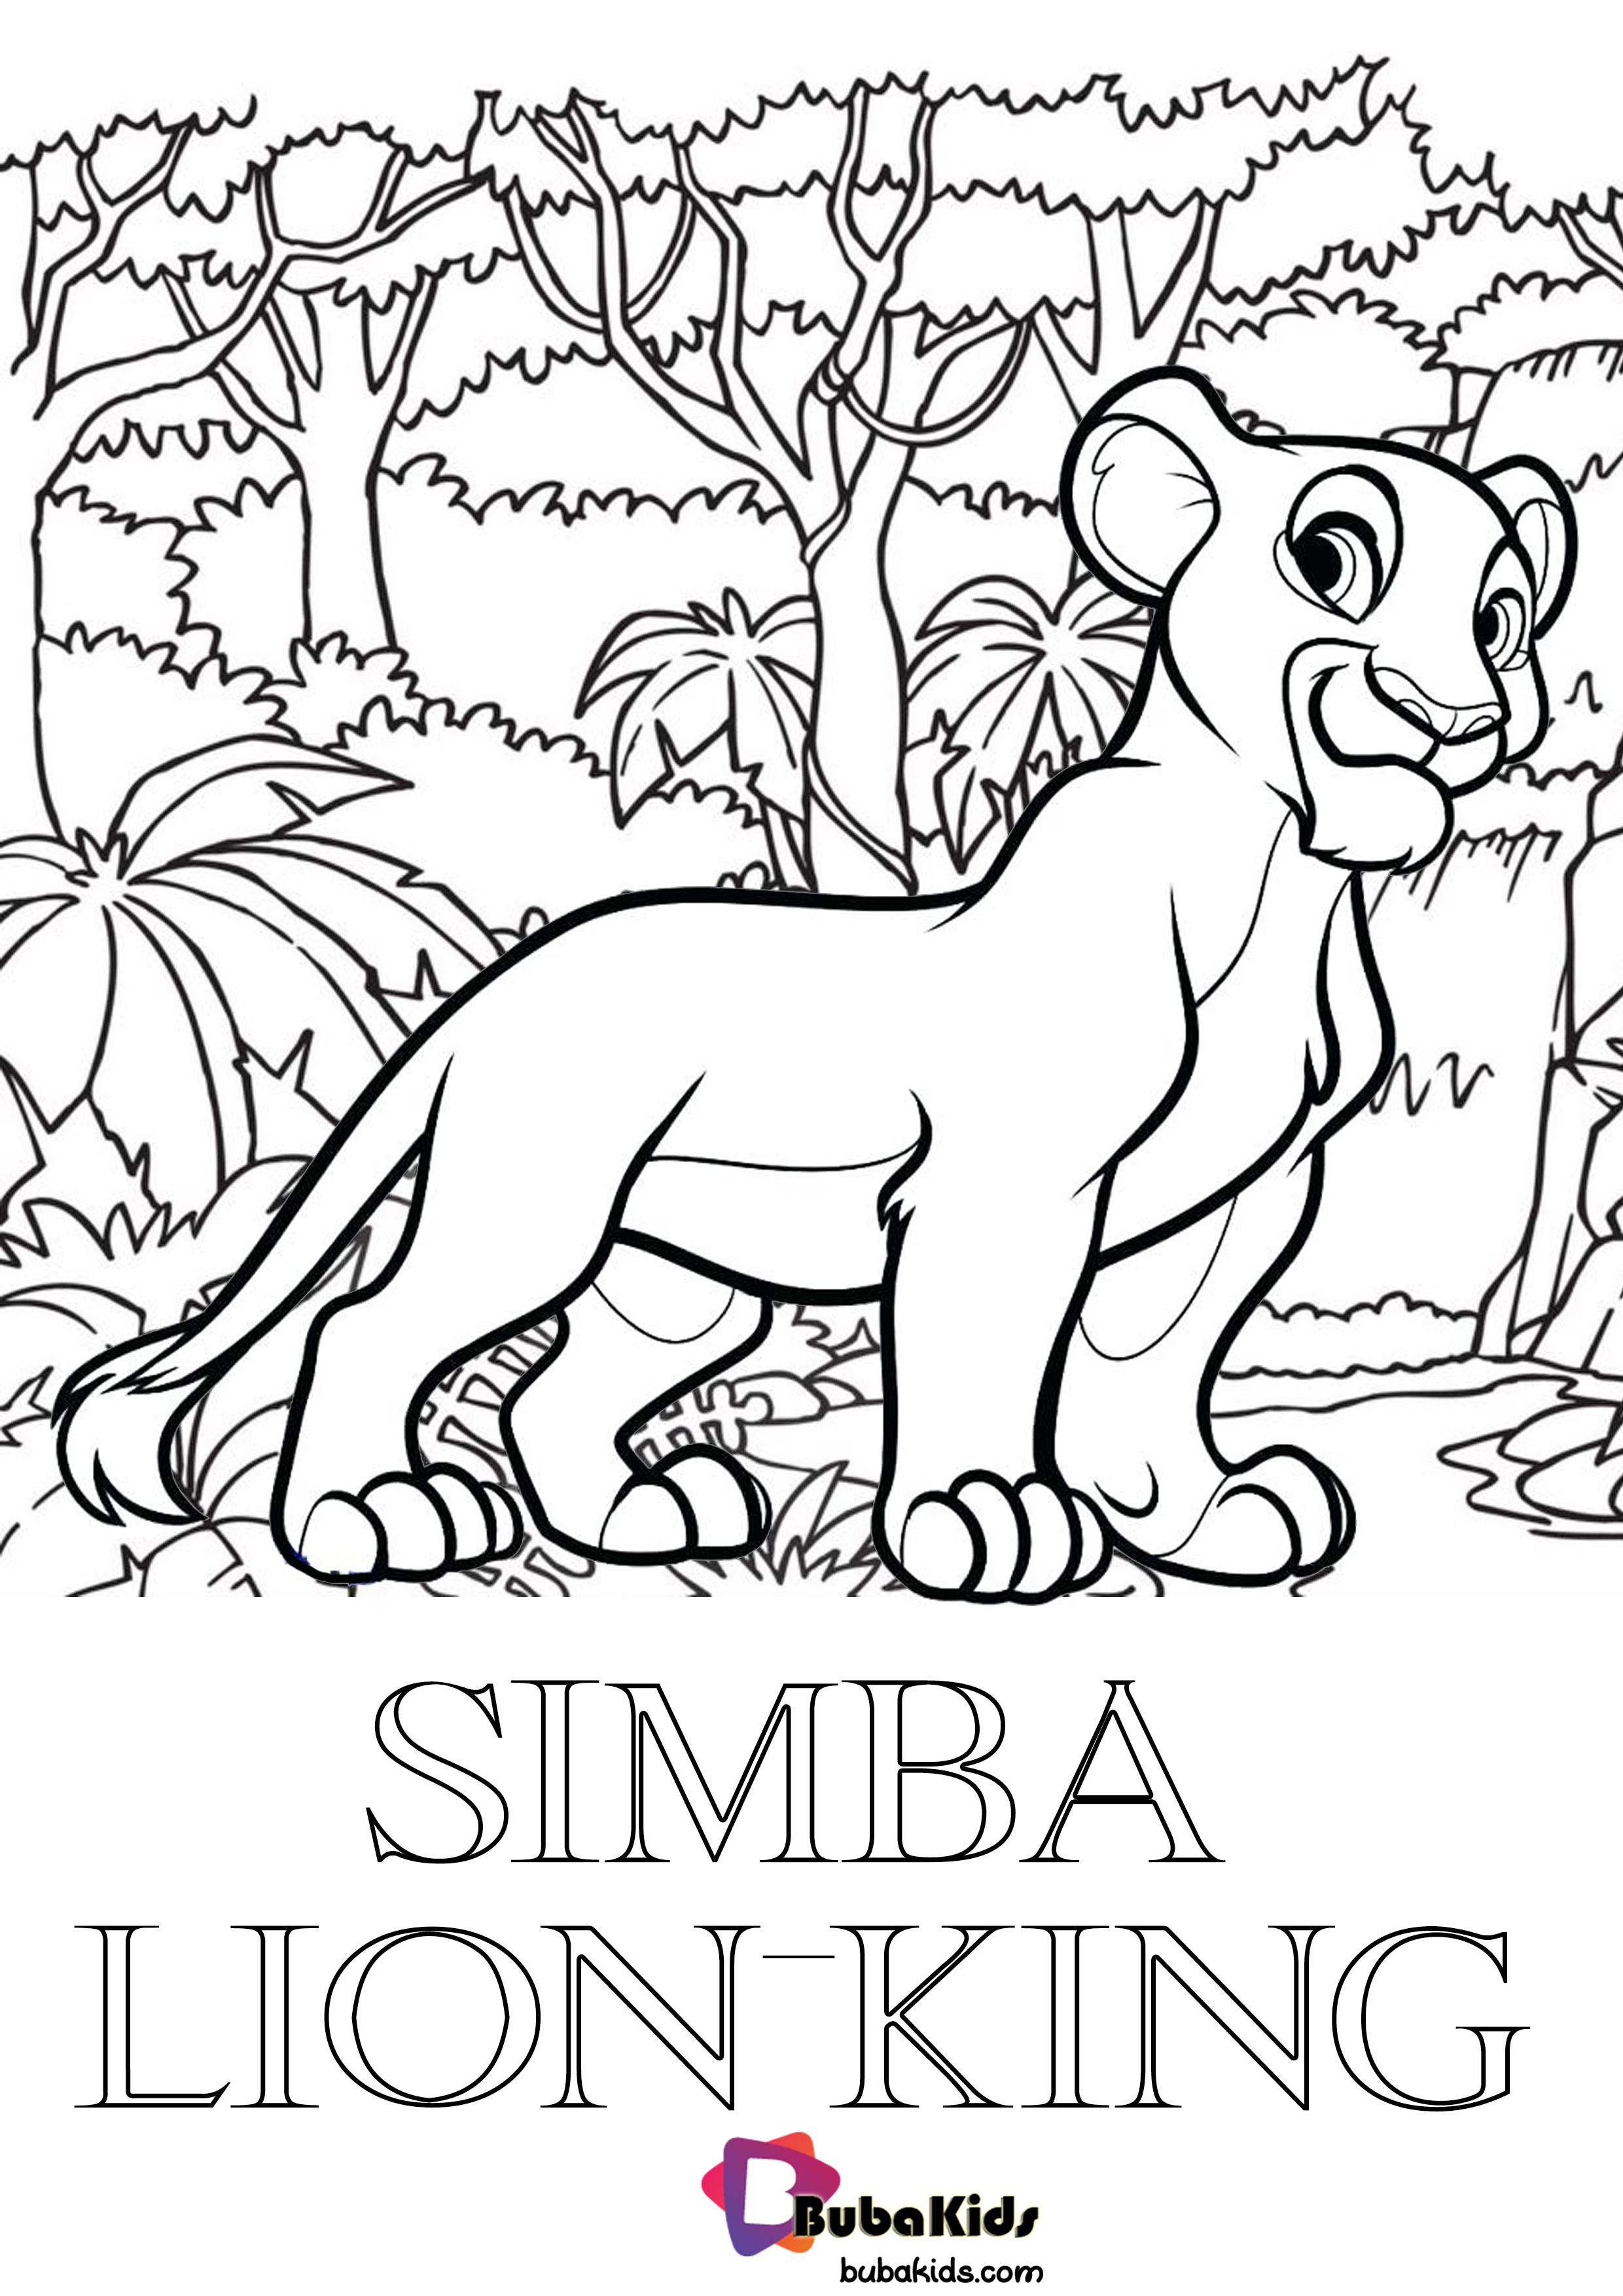 Simba The Lion King in The Jungle Coloring Pages